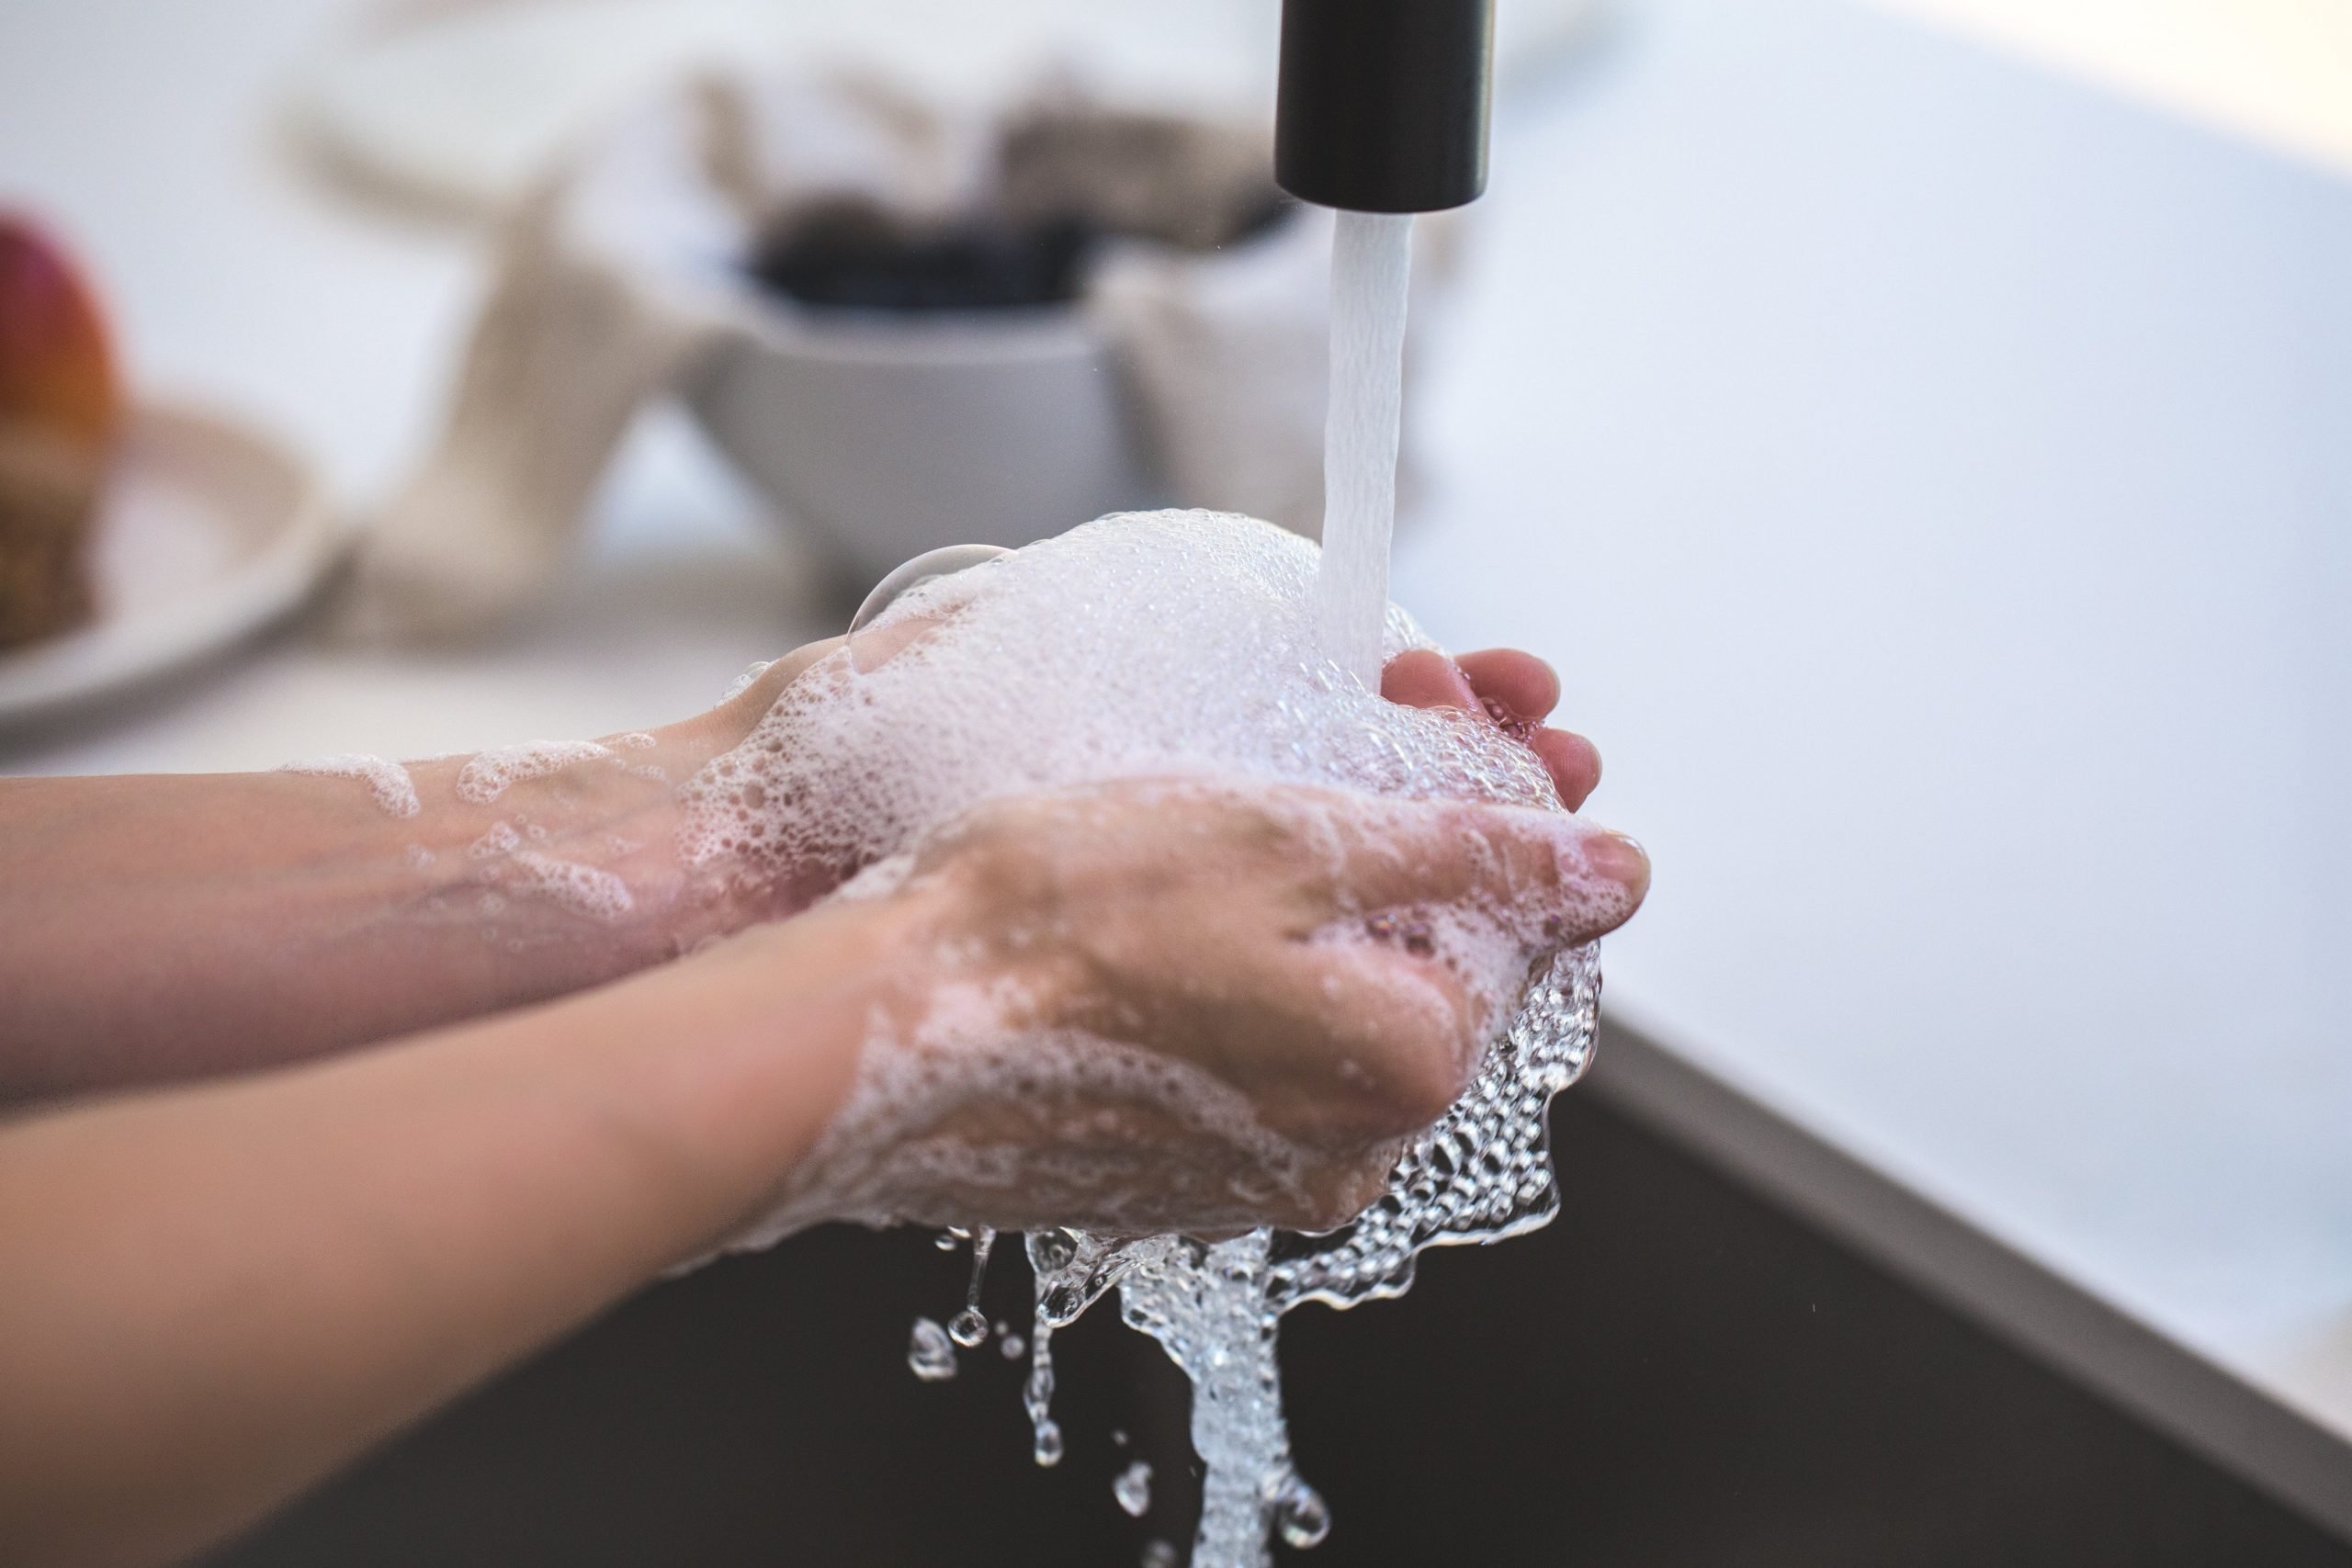 person washing their hands with soap and water to stay healthy while traveling